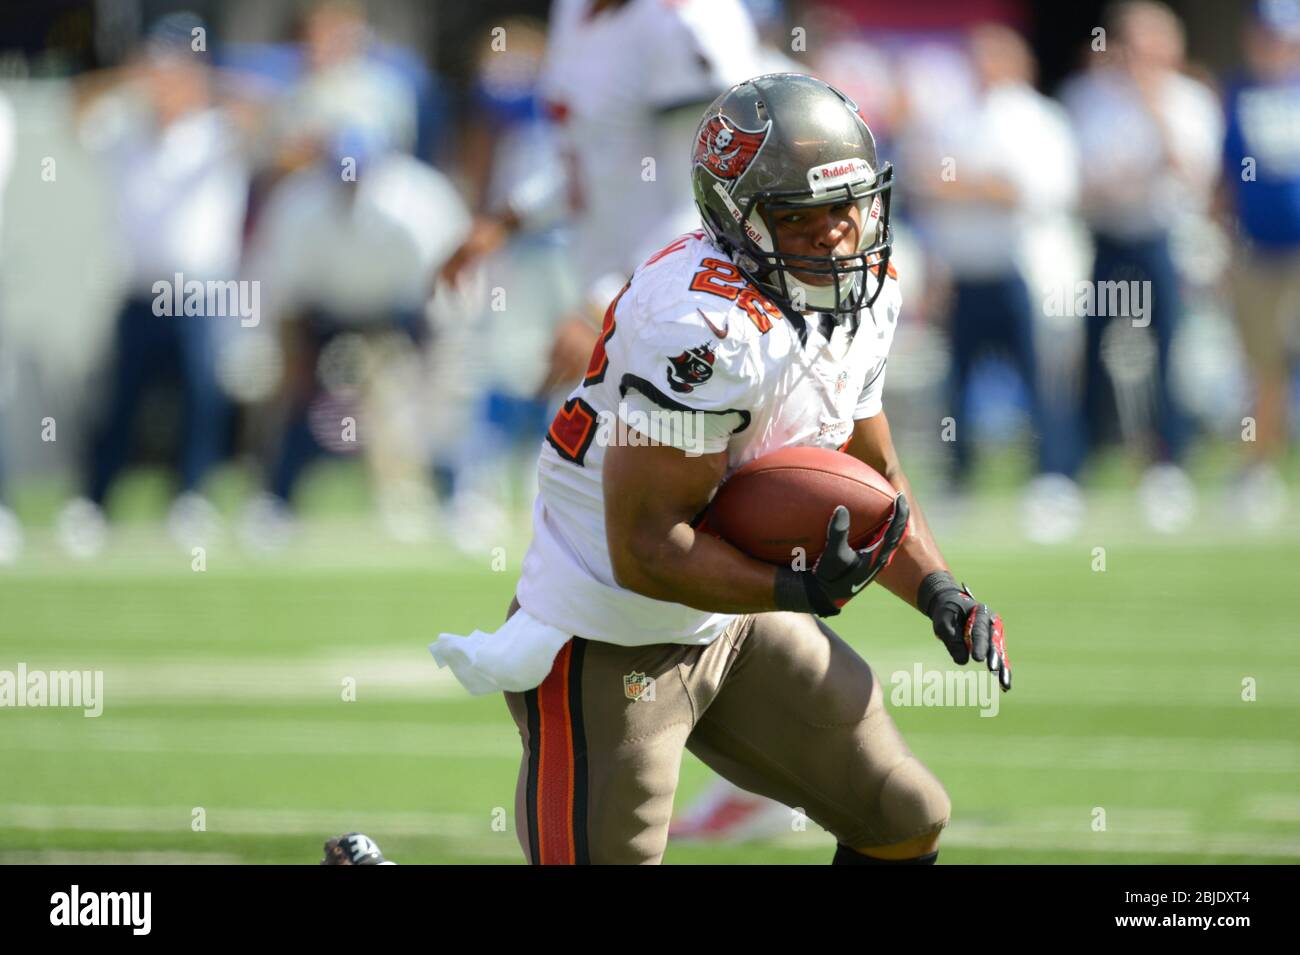 16 September 2012: Tampa Bay Buccaneers running back Doug Martin (22) carries the ball during a week 2 NFL NFC matchup between the Tampa Bay Buccaneer Stock Photo